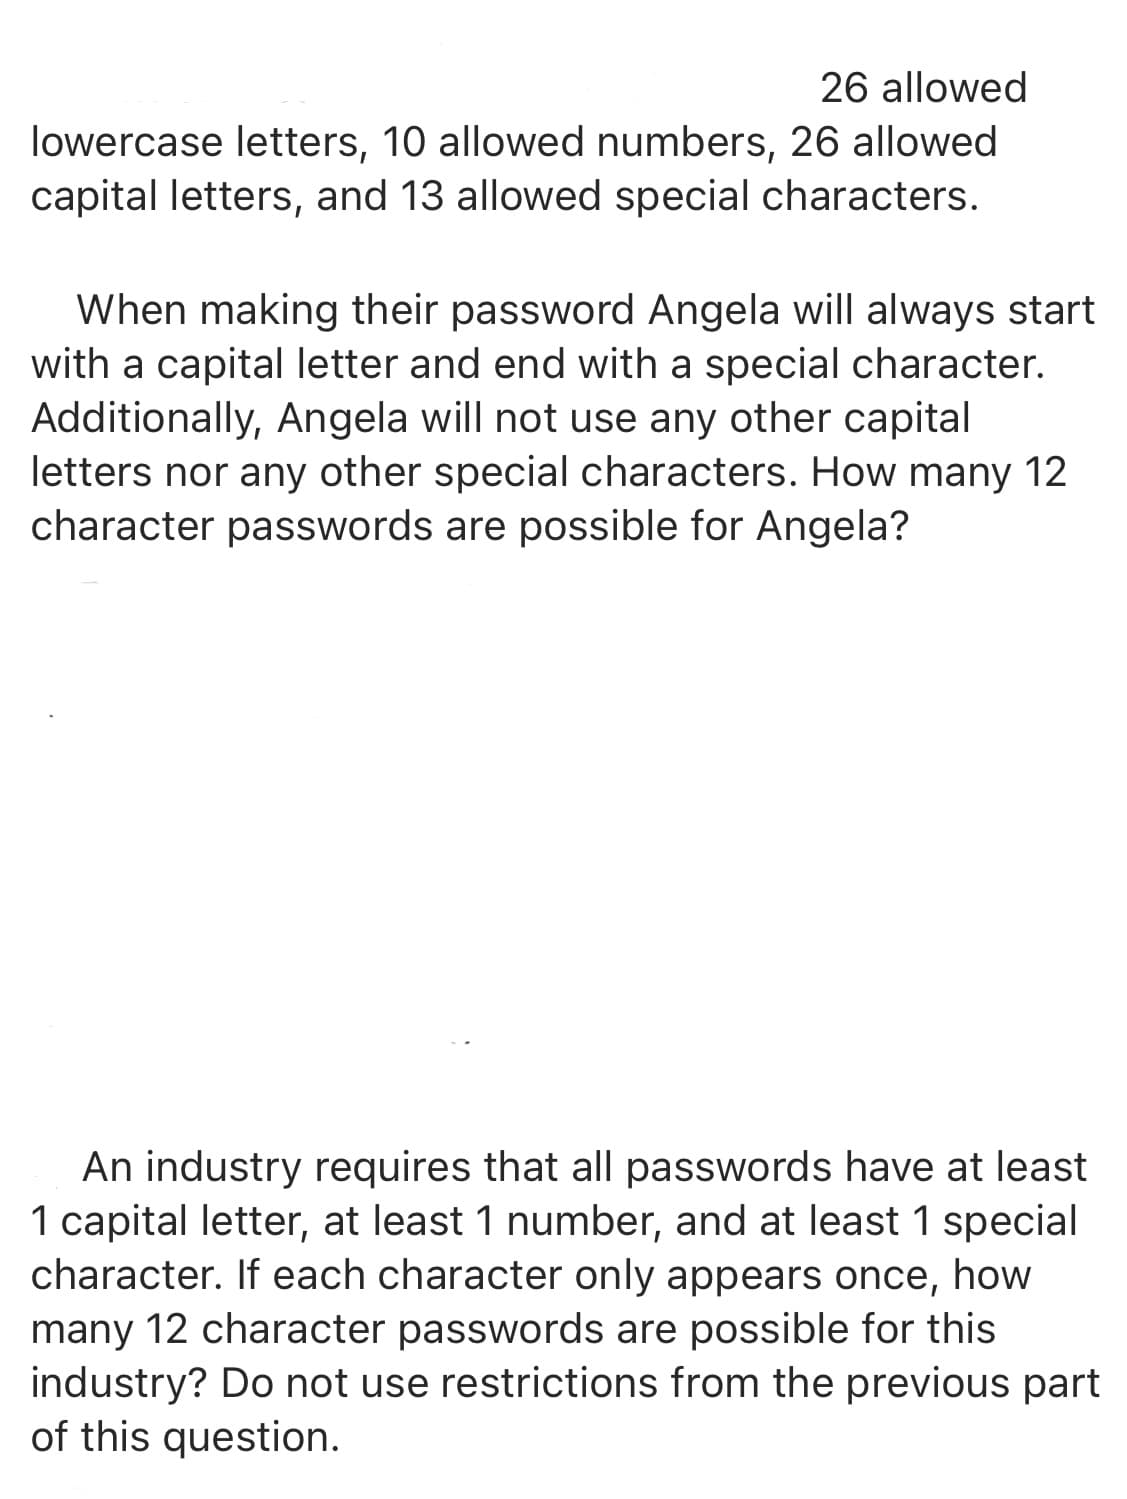 26 allowed
lowercase letters, 10 allowed numbers, 26 allowed
capital letters, and 13 allowed special characters.
When making their password Angela will always start
with a capital letter and end with a special character.
Additionally, Angela will not use any other capital
letters nor any other special characters. How many 12
character passwords are possible for Angela?
An industry requires that all passwords have at least
1 capital letter, at least 1 number, and at least 1 special
character. If each character only appears once, how
many 12 character passwords are possible for this
industry? Do not use restrictions from the previous part
of this question.